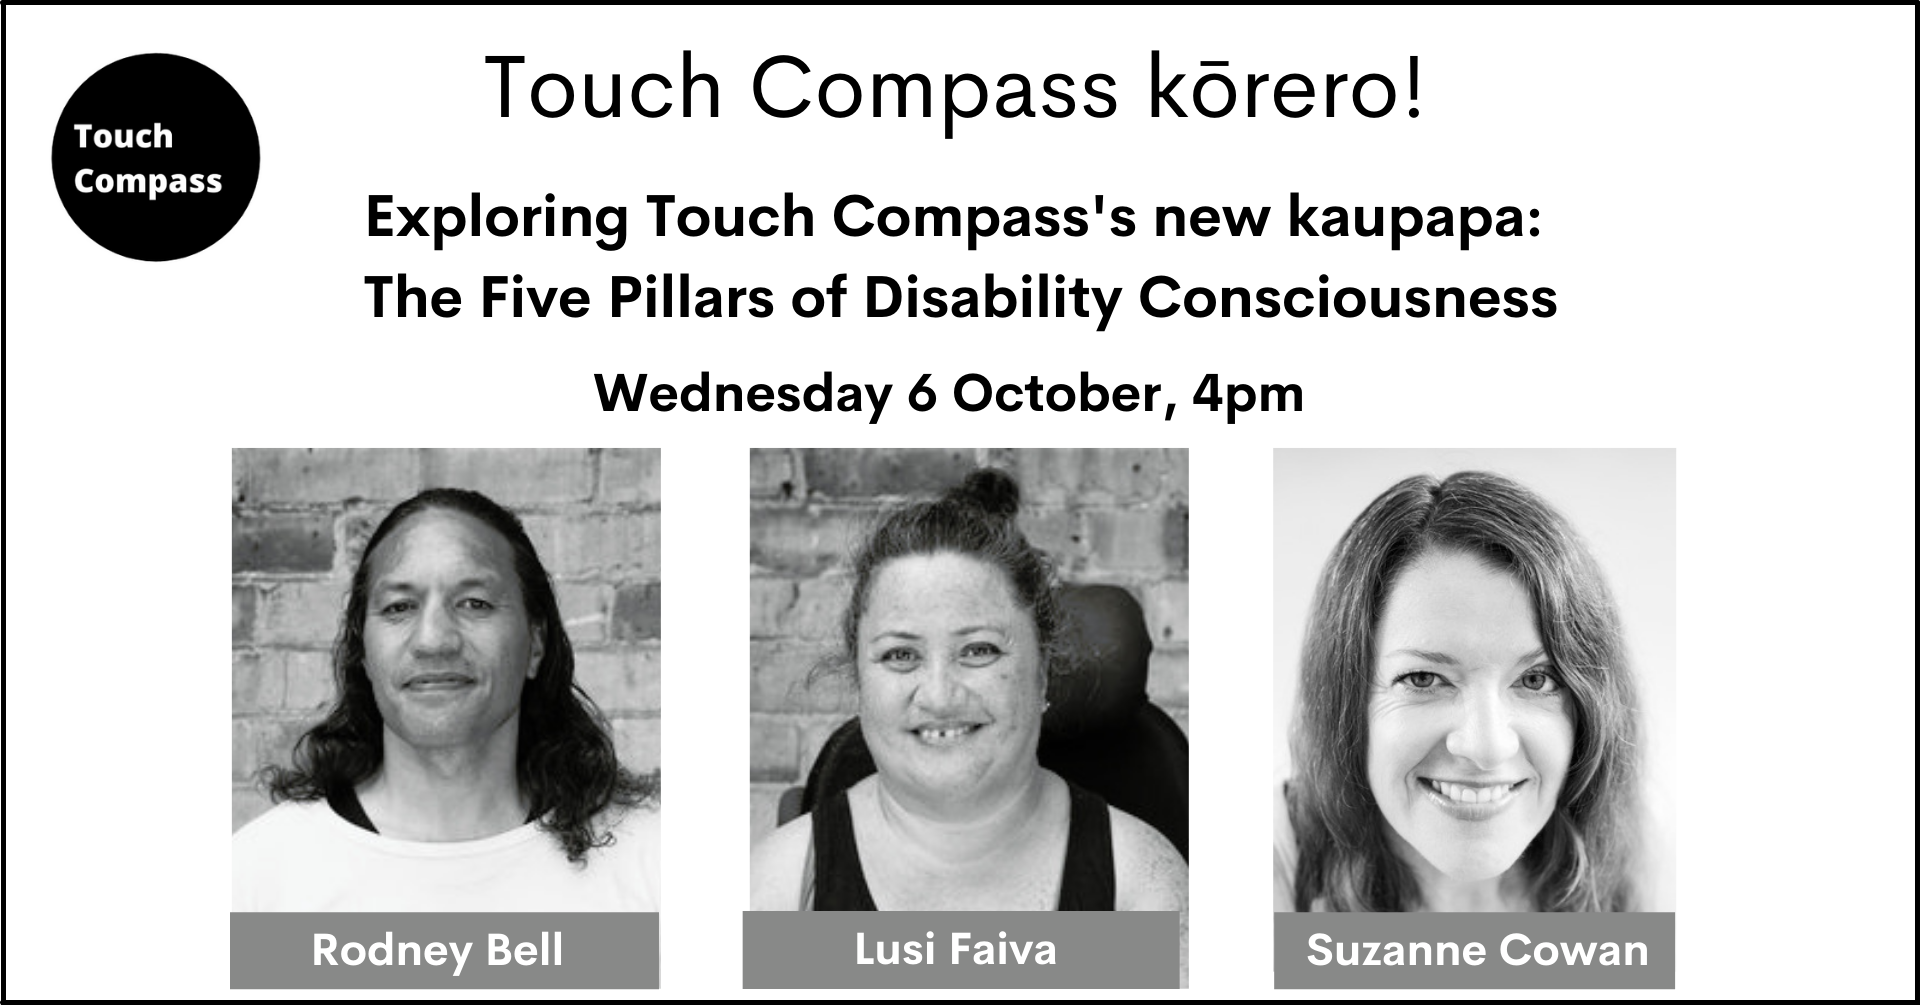 Touch Compass is taking advantage of our various lockdown levels by hosting thought-provoking online kōrero on various arts and disability topics, led by our Artistic Direction Panel - Lusi Faiva, Rodney Bell and Suzanne Cowan. 